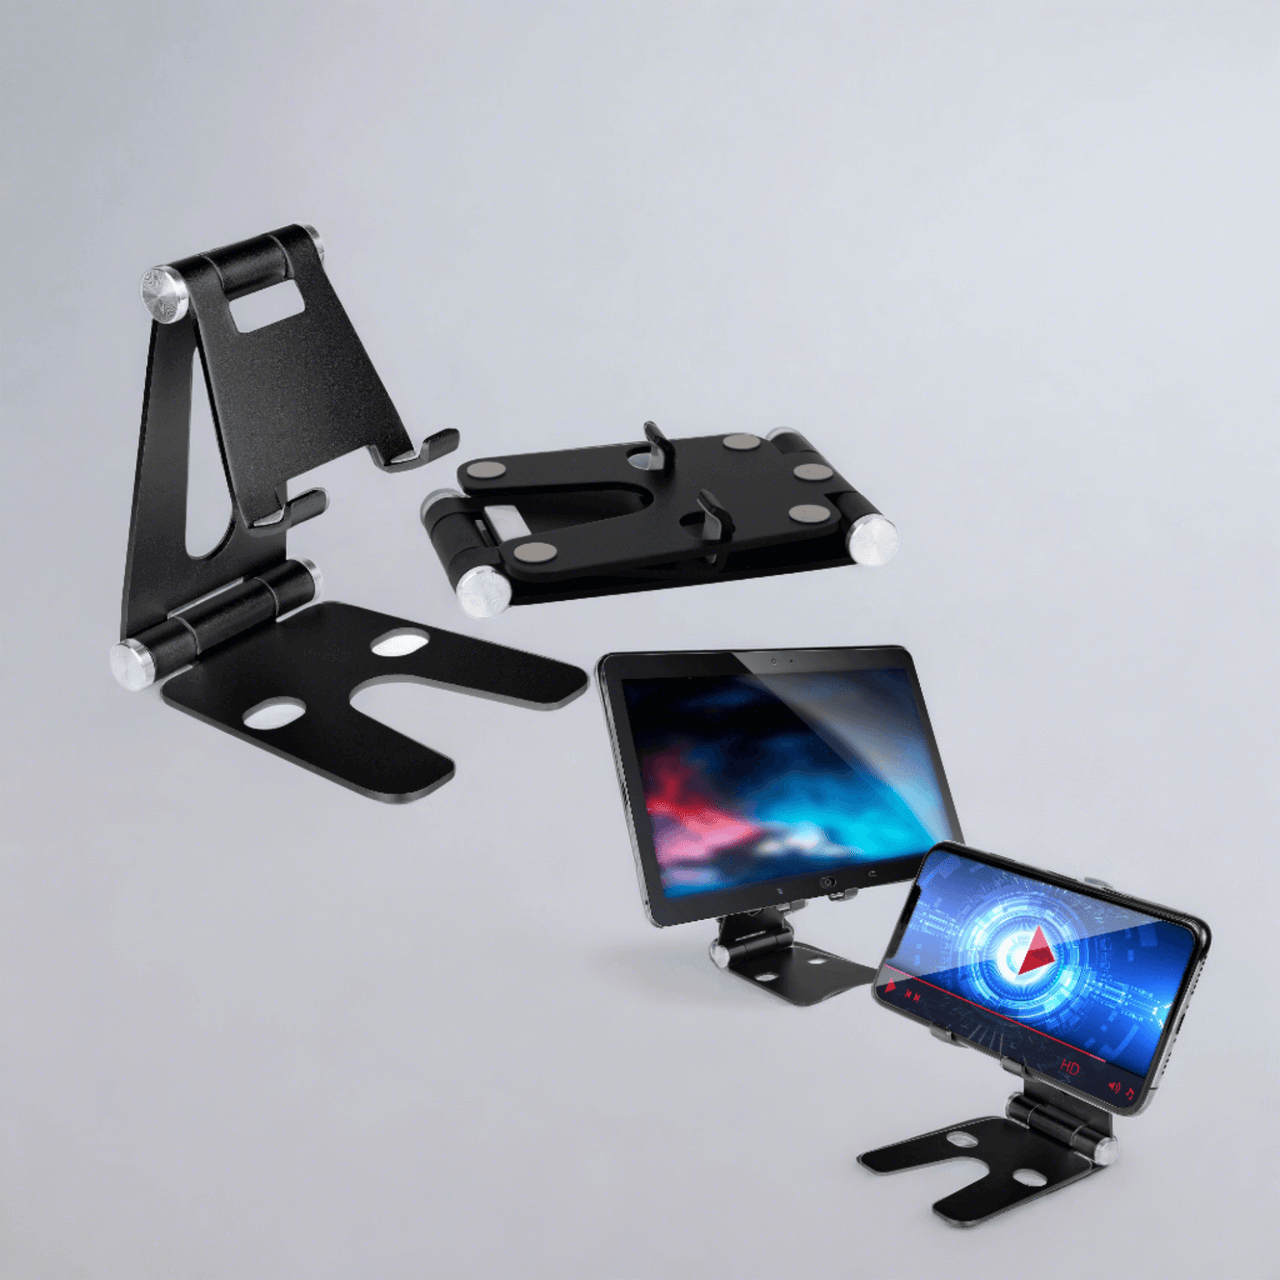 Versatile Phone & Tablet Stand Holder - Adjustable metal stand for secure display of mobile devices